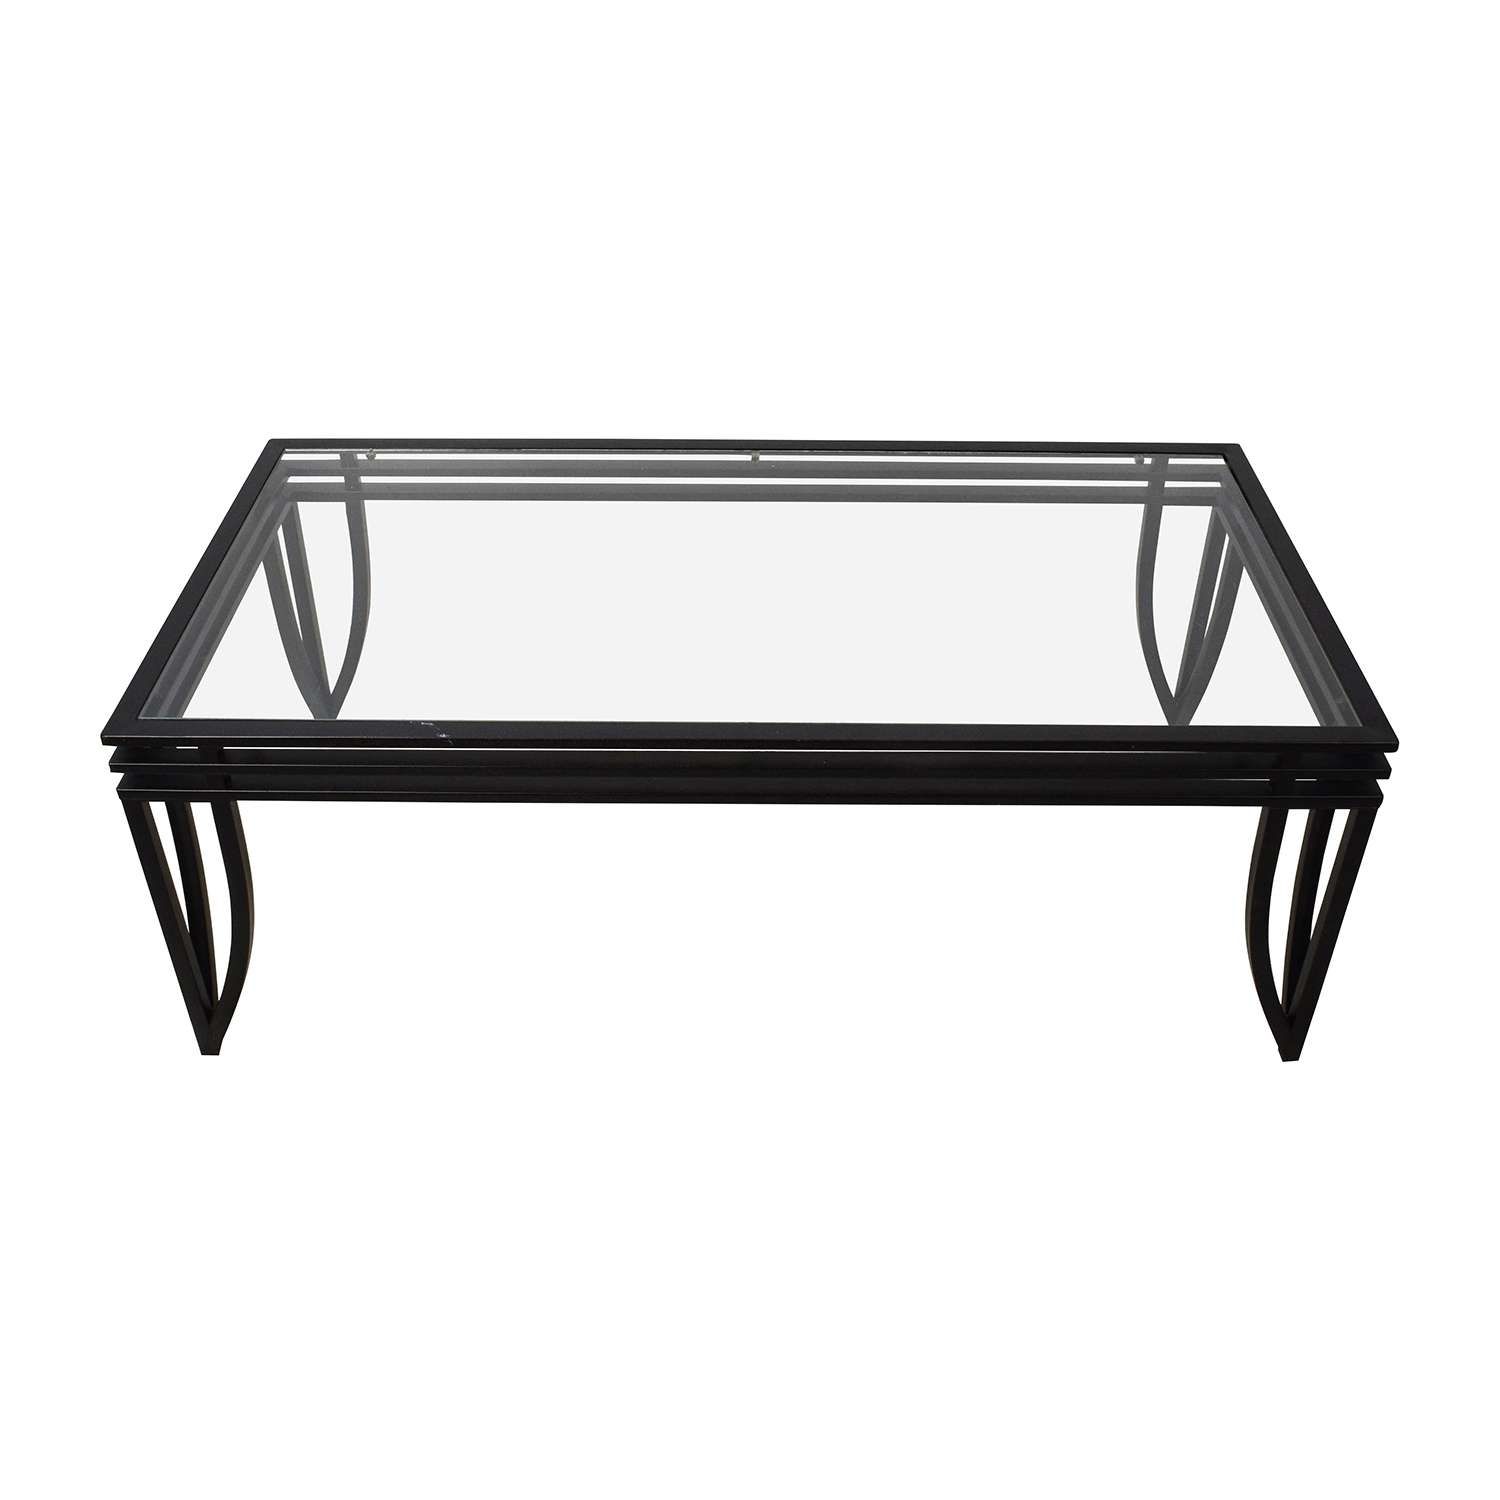 [%favorite Rectangle Glass Coffee Table Regarding 77% Off – Ashley Furniture Ashley Furniture Rectangular Glass And|77% Off – Ashley Furniture Ashley Furniture Rectangular Glass And Within Most Current Rectangle Glass Coffee Table%] (View 4 of 20)